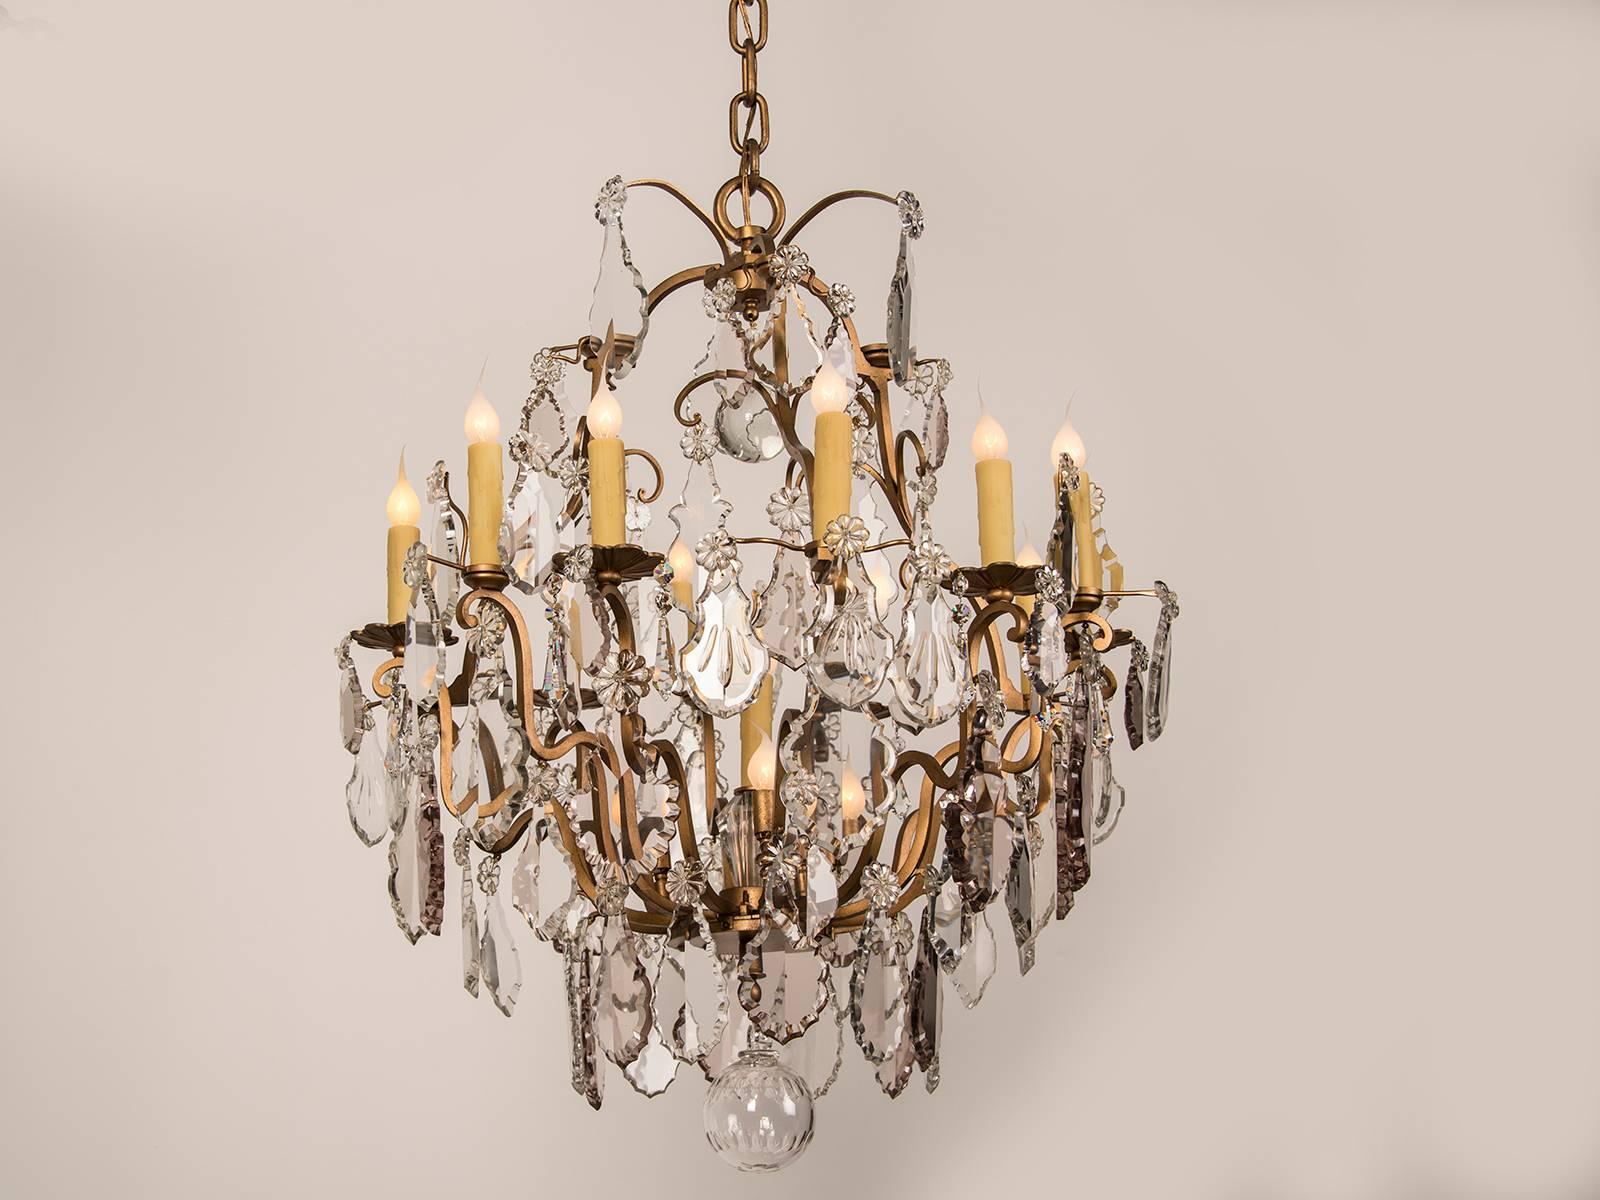 A beautiful antique French Louis XV style crystal chandelier with sixteen lights from France circa 1900 of large scale. The unusual feature of this grand chandelier lies in its allocation of lights. Around the perimetre of the chandelier is an